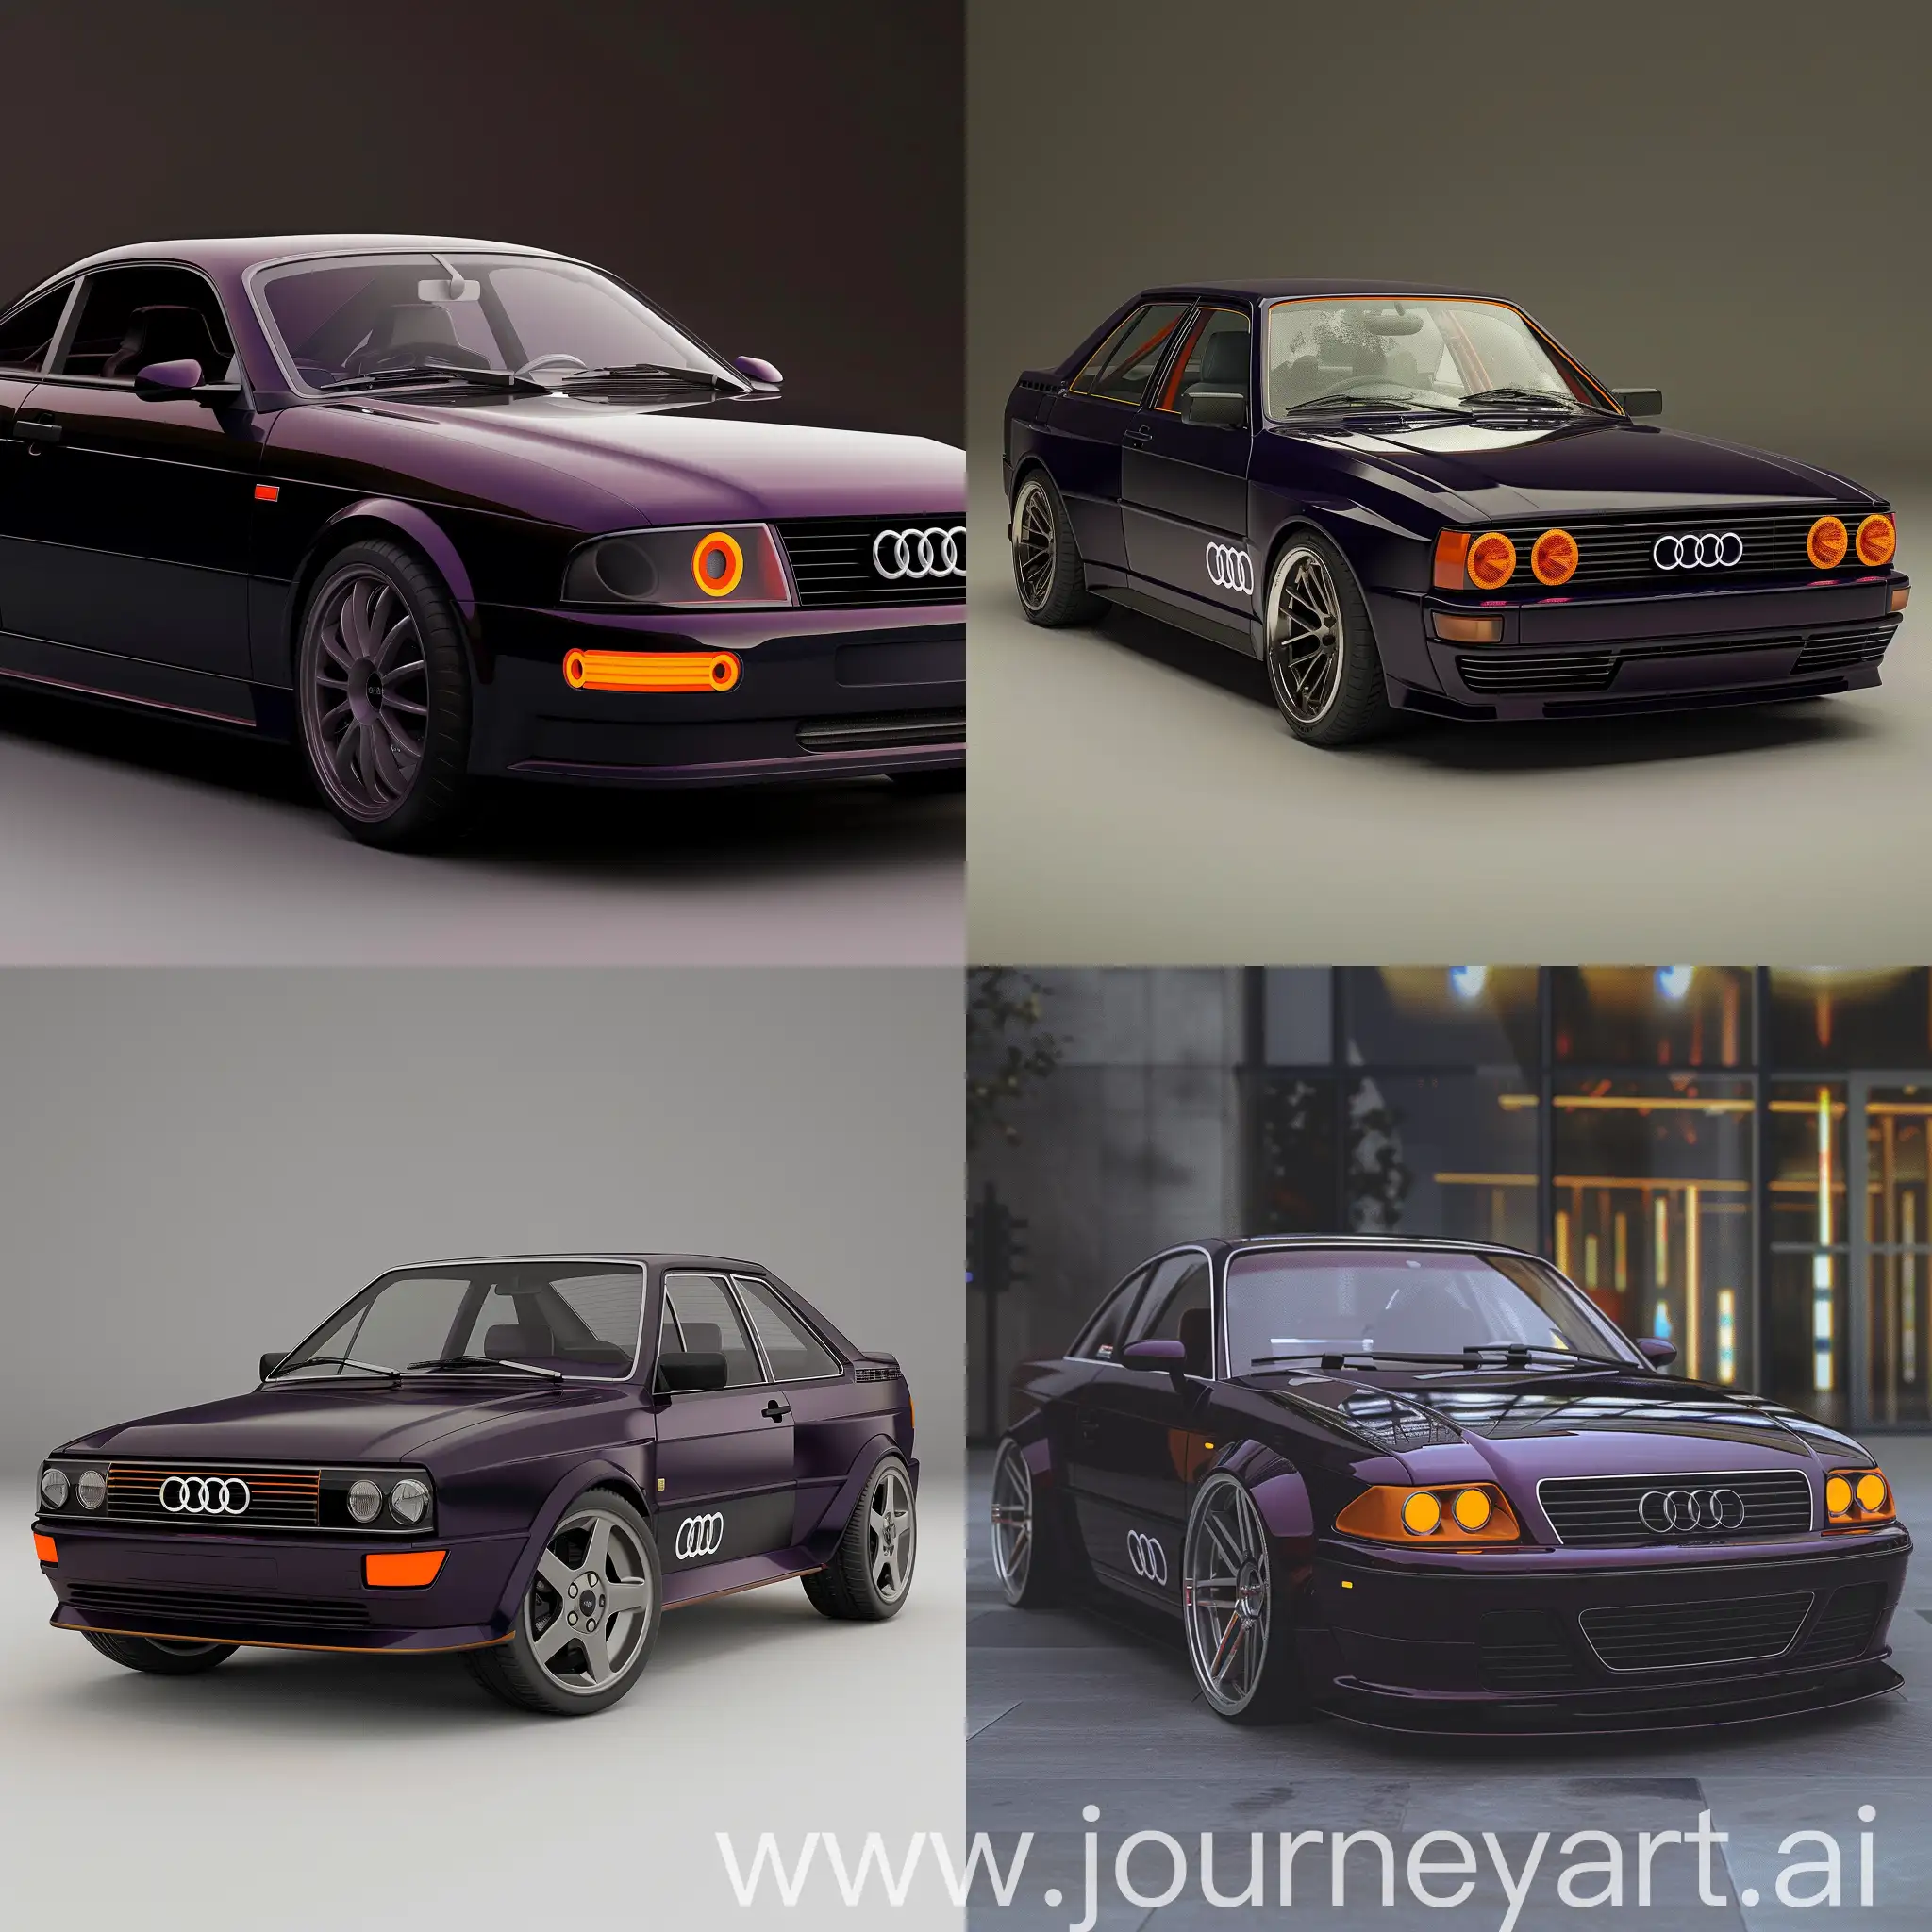 Sleek-Audi-100-C4-in-Dark-Amethyst-with-Orange-Accents-and-Sporty-Features